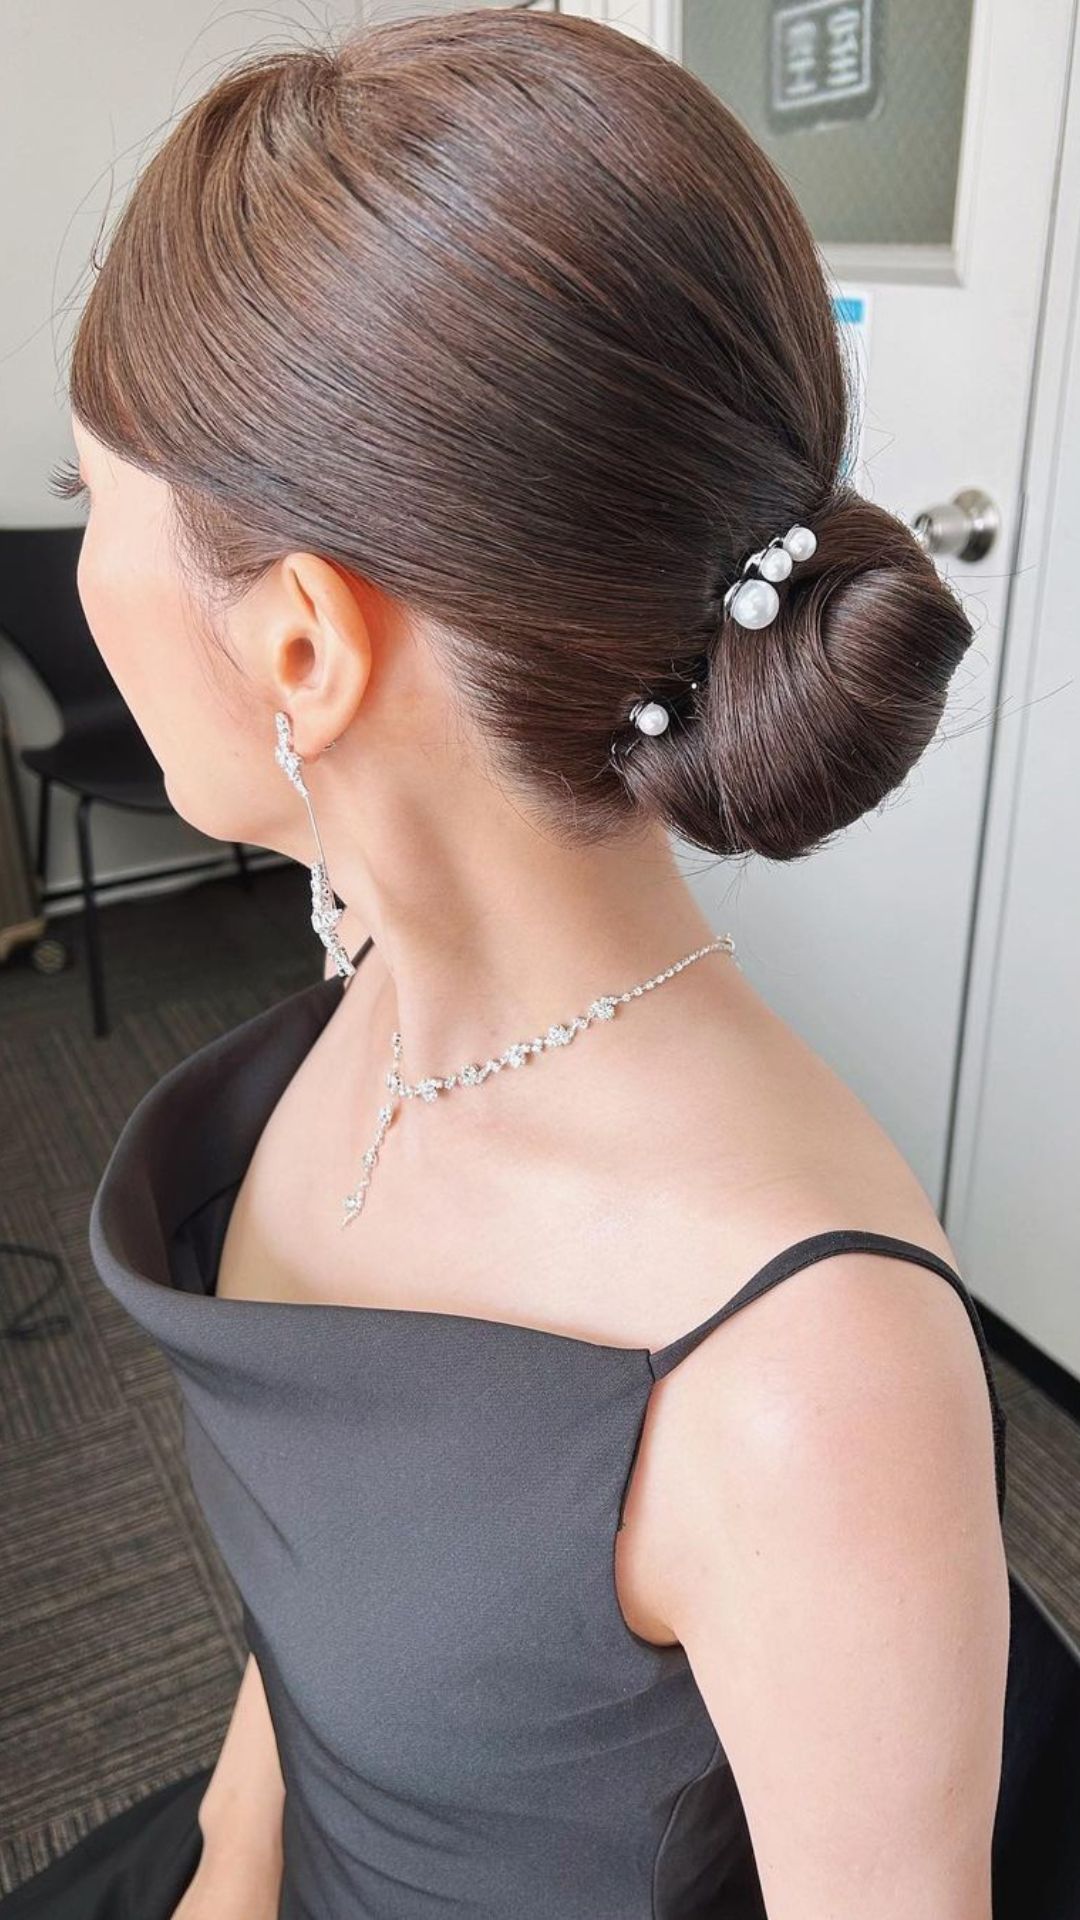 A woman with low chignon.